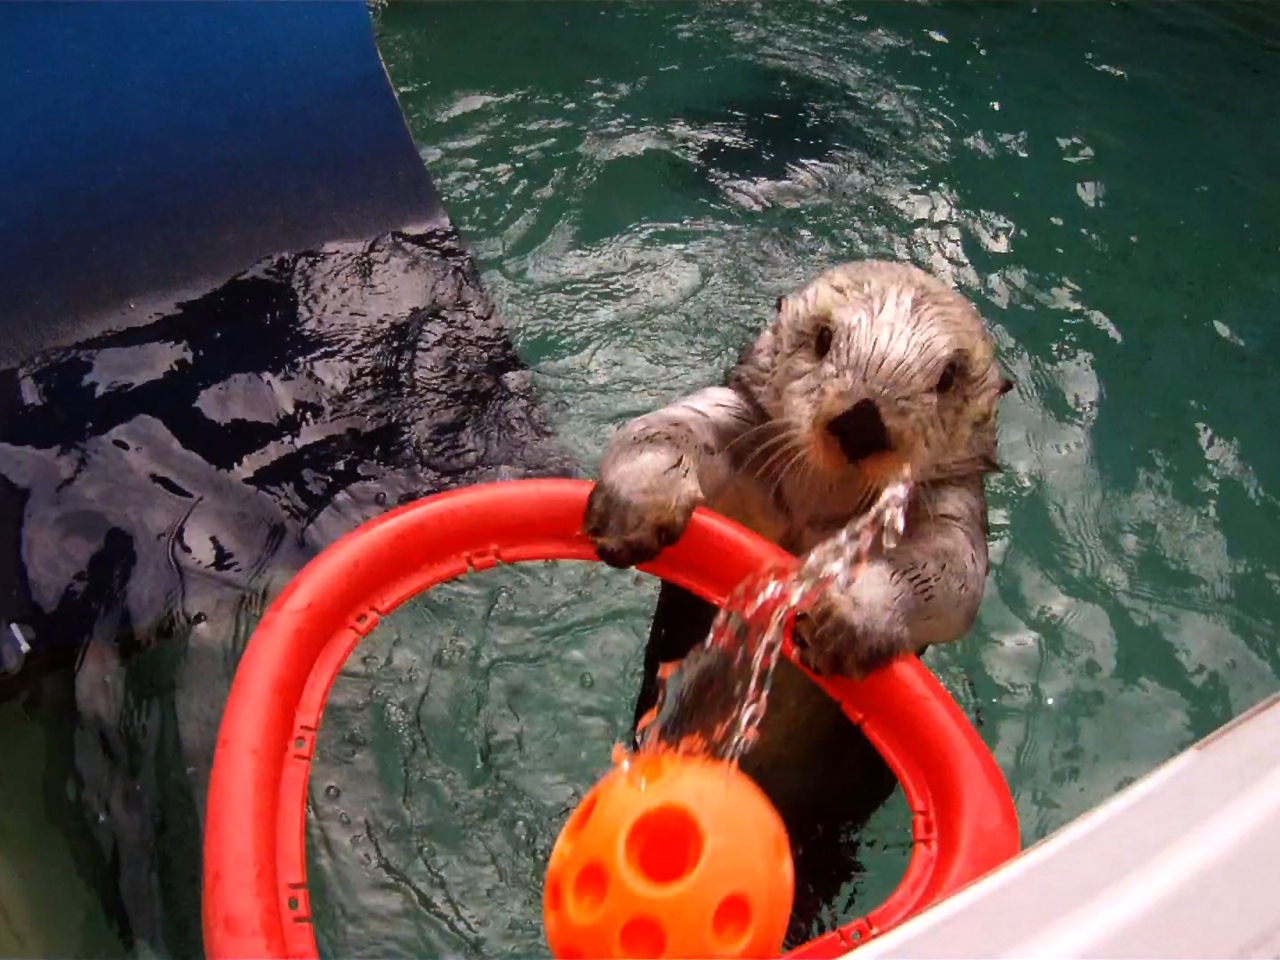 Ever Seen a Sea Otter Dunk? Do you want to?